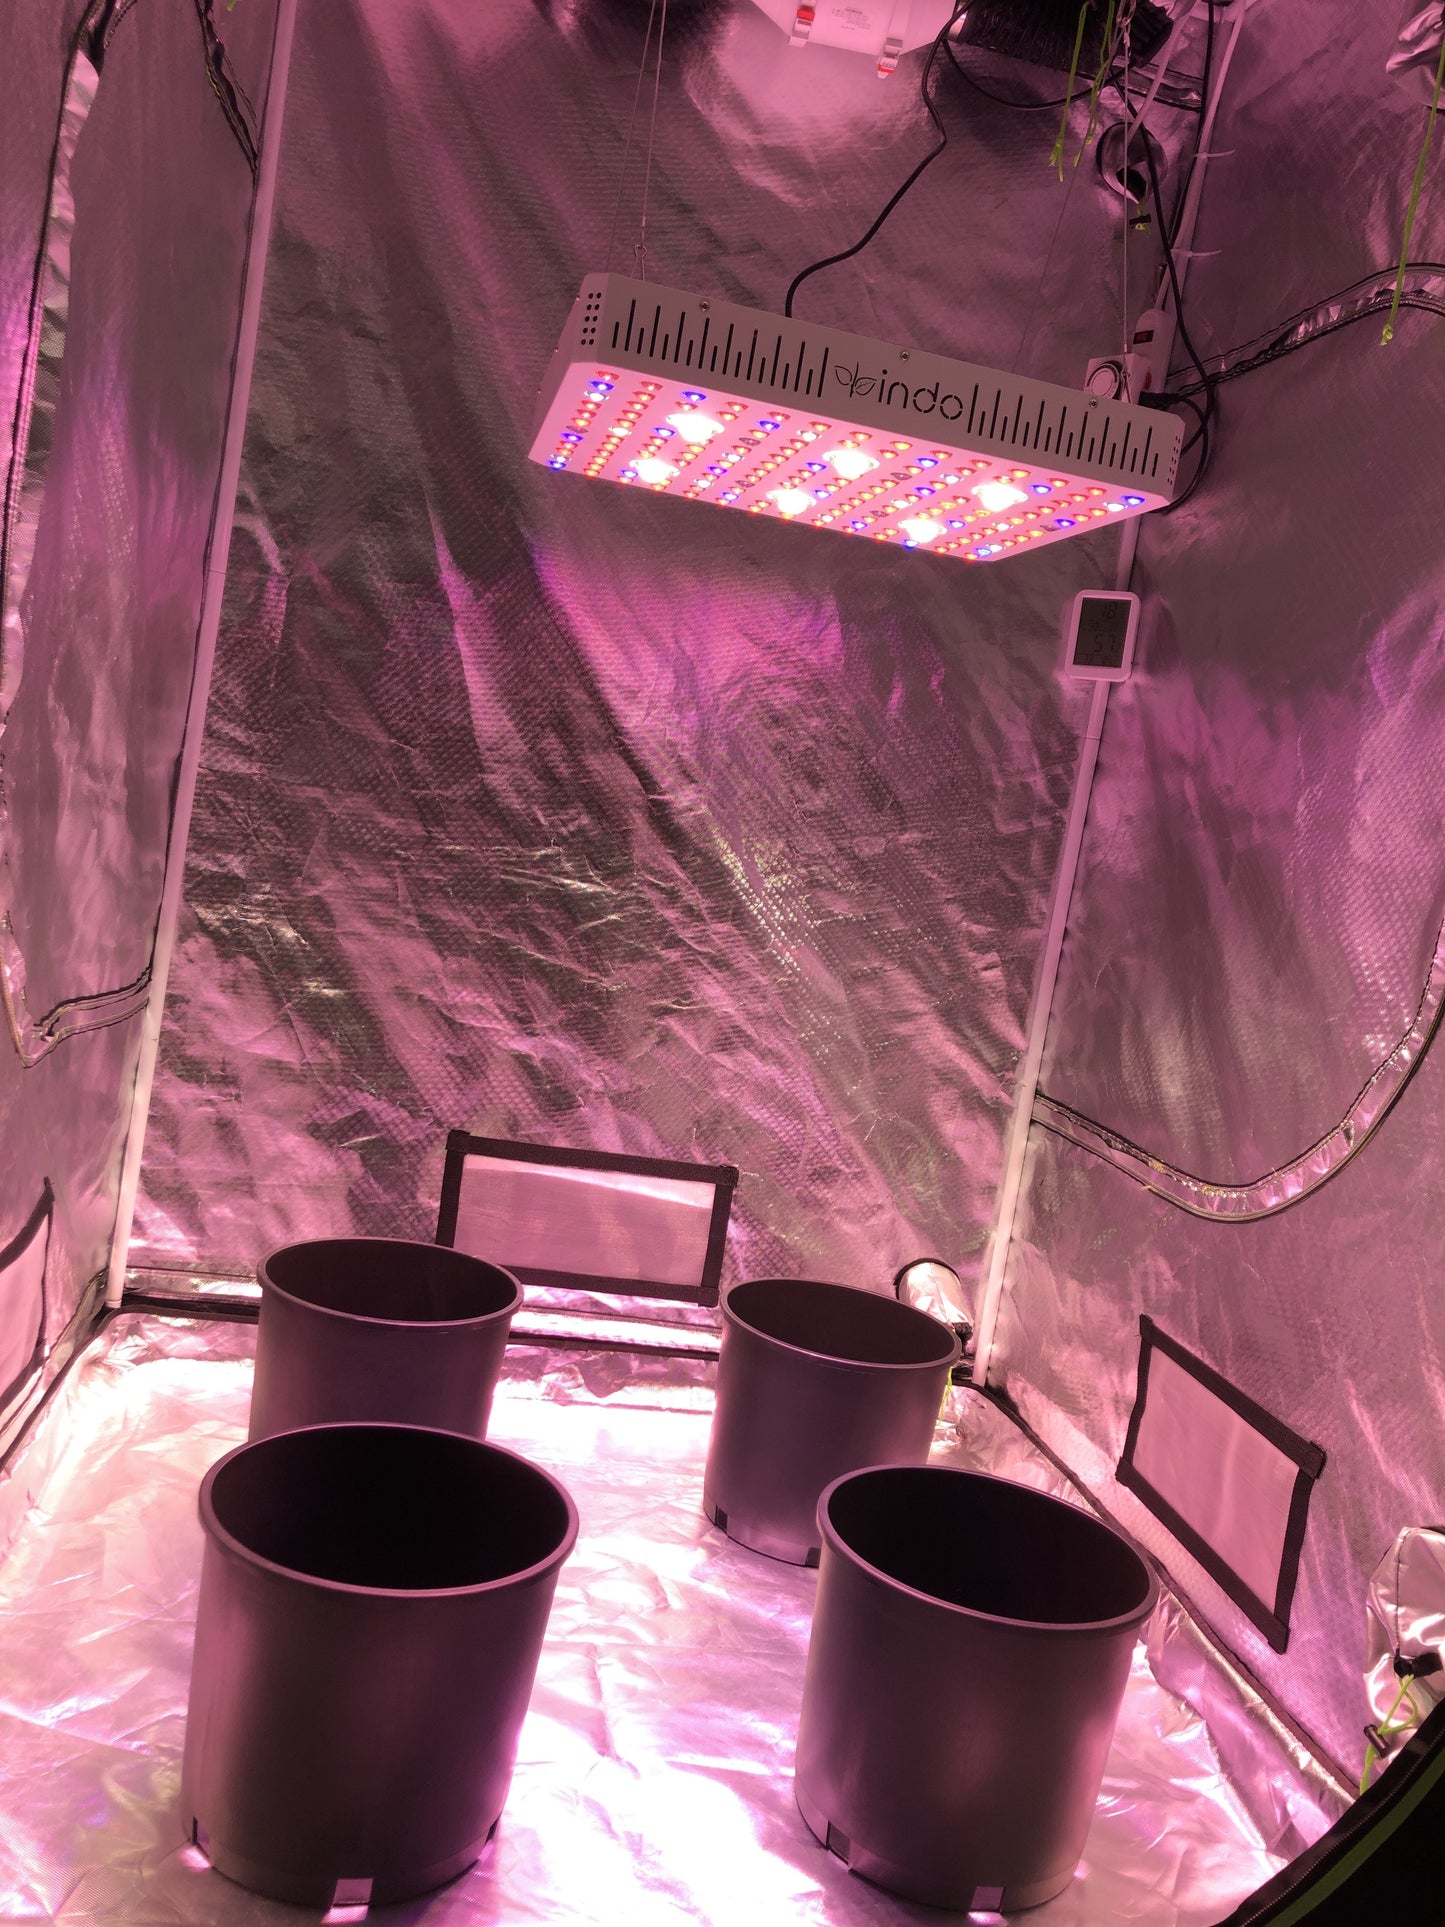 Complete Grow Kit - 48"x48"x80" Grow Tent - 600W GrowHub Light with 6" Fan and Filter Kit